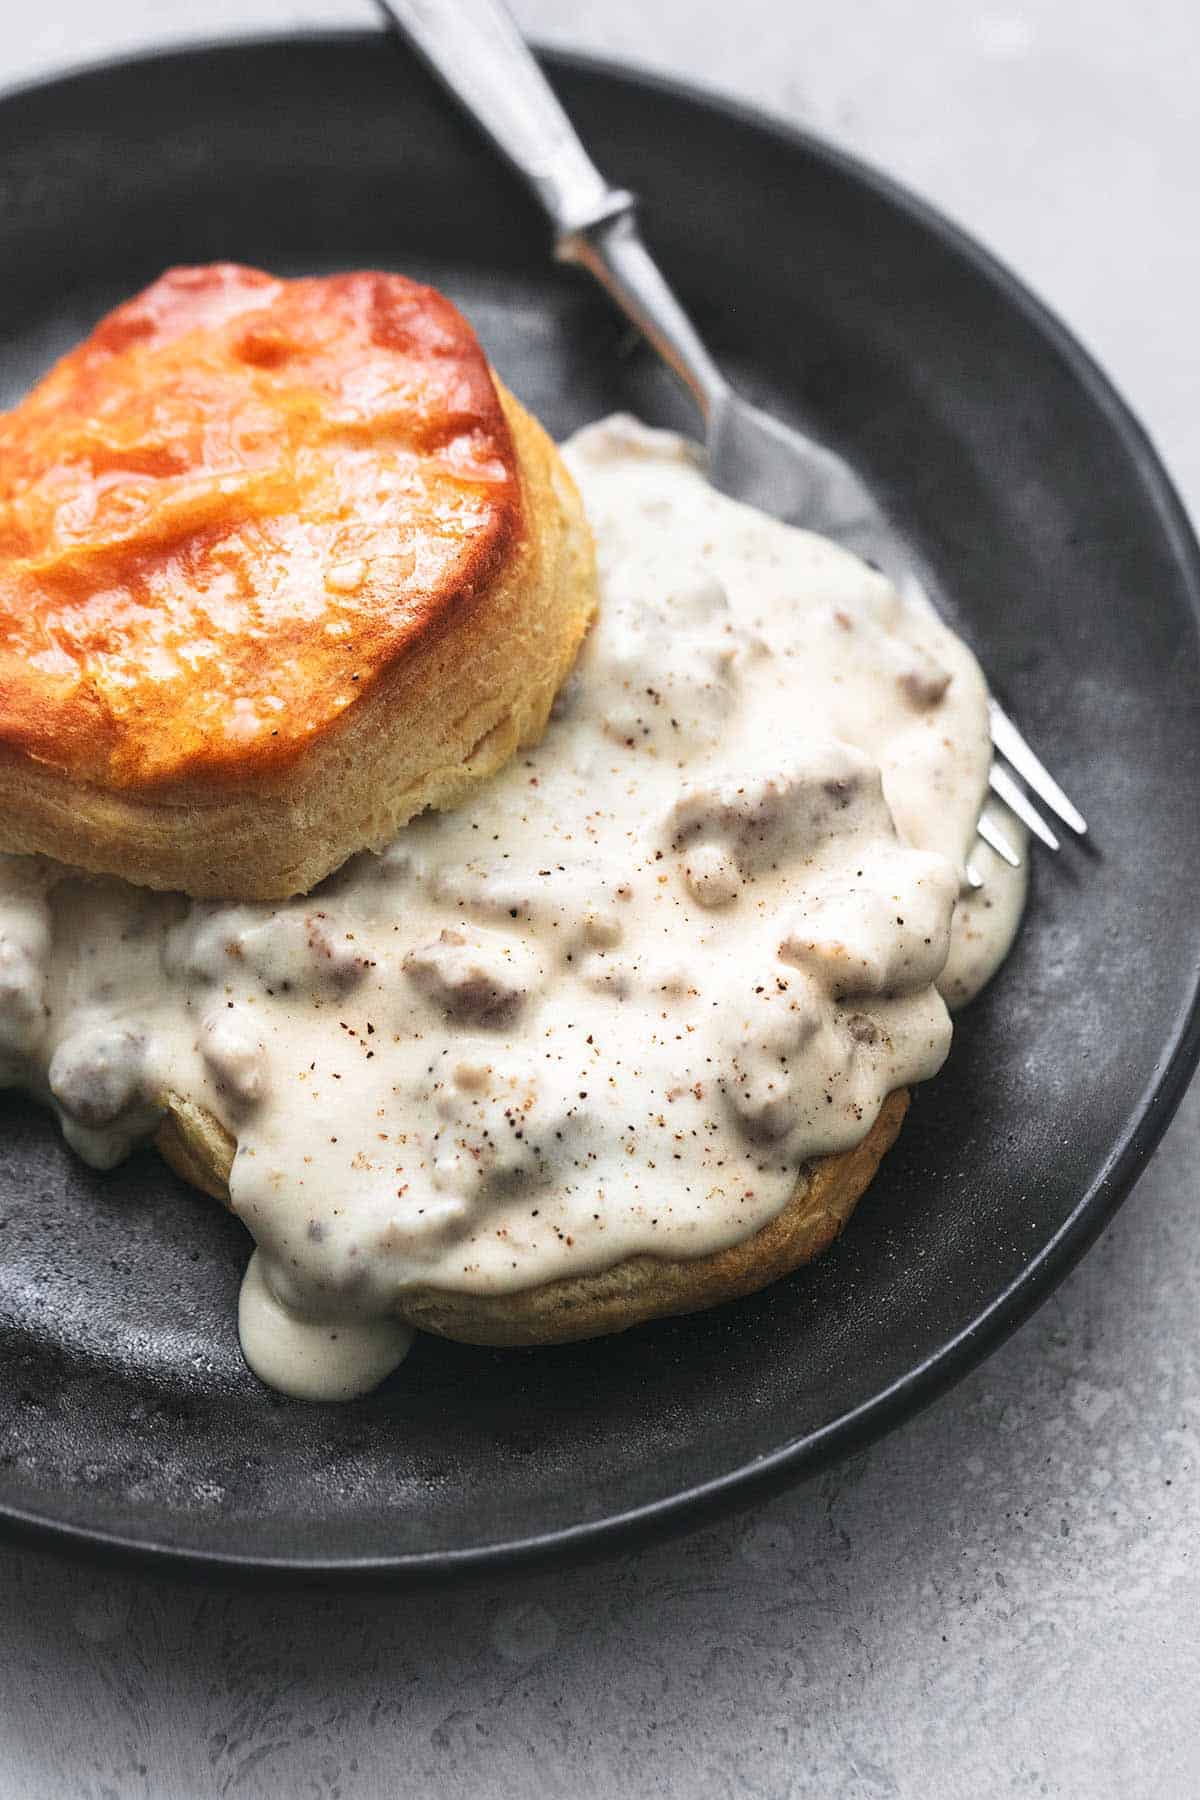  biscuits and sausage gravy with fork on plate